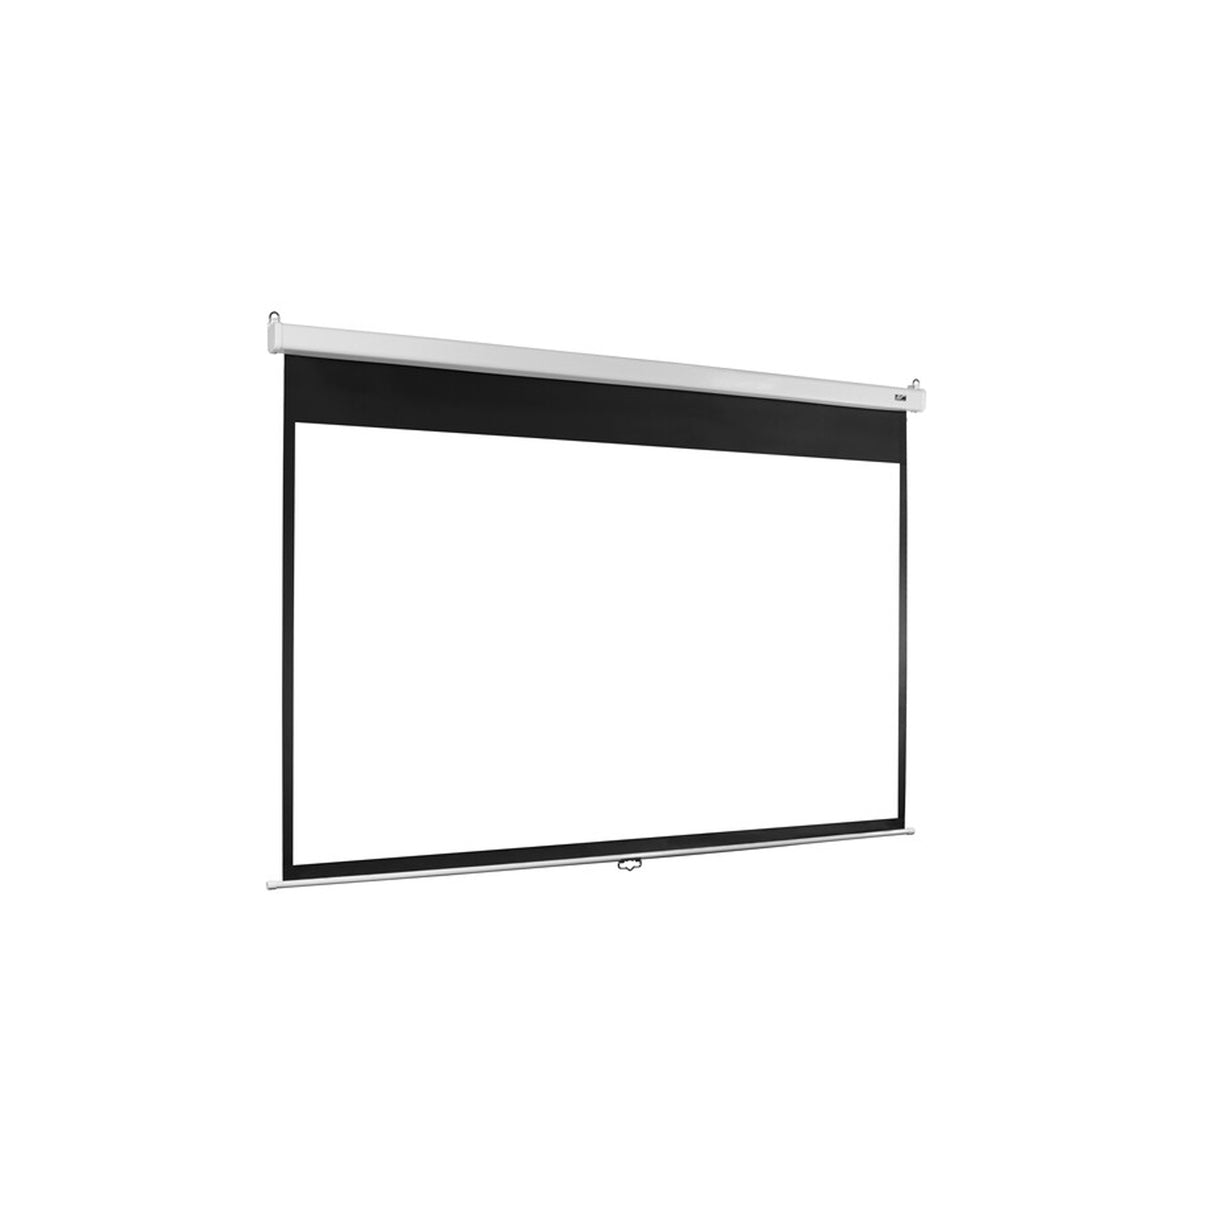 Elite ScreensM120HSR-PRO - 120 Inches MaxWhite Manual Pull Down 4K UHD Projection Screen (16:9)